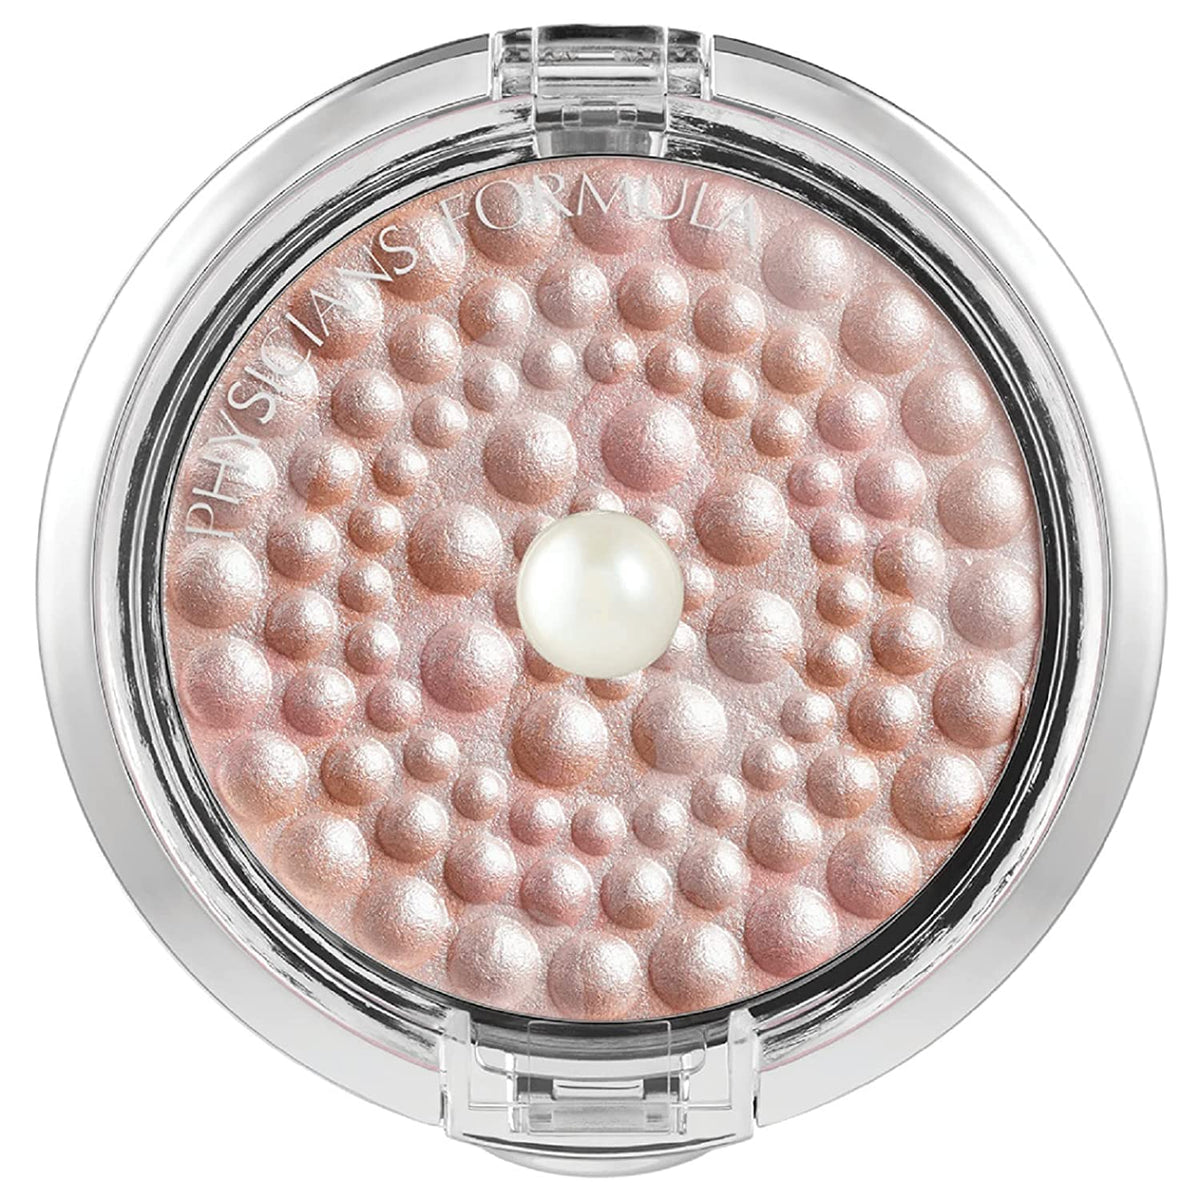 Physicians Formula Powder Palette Mineral Glow Pearls -Translucent